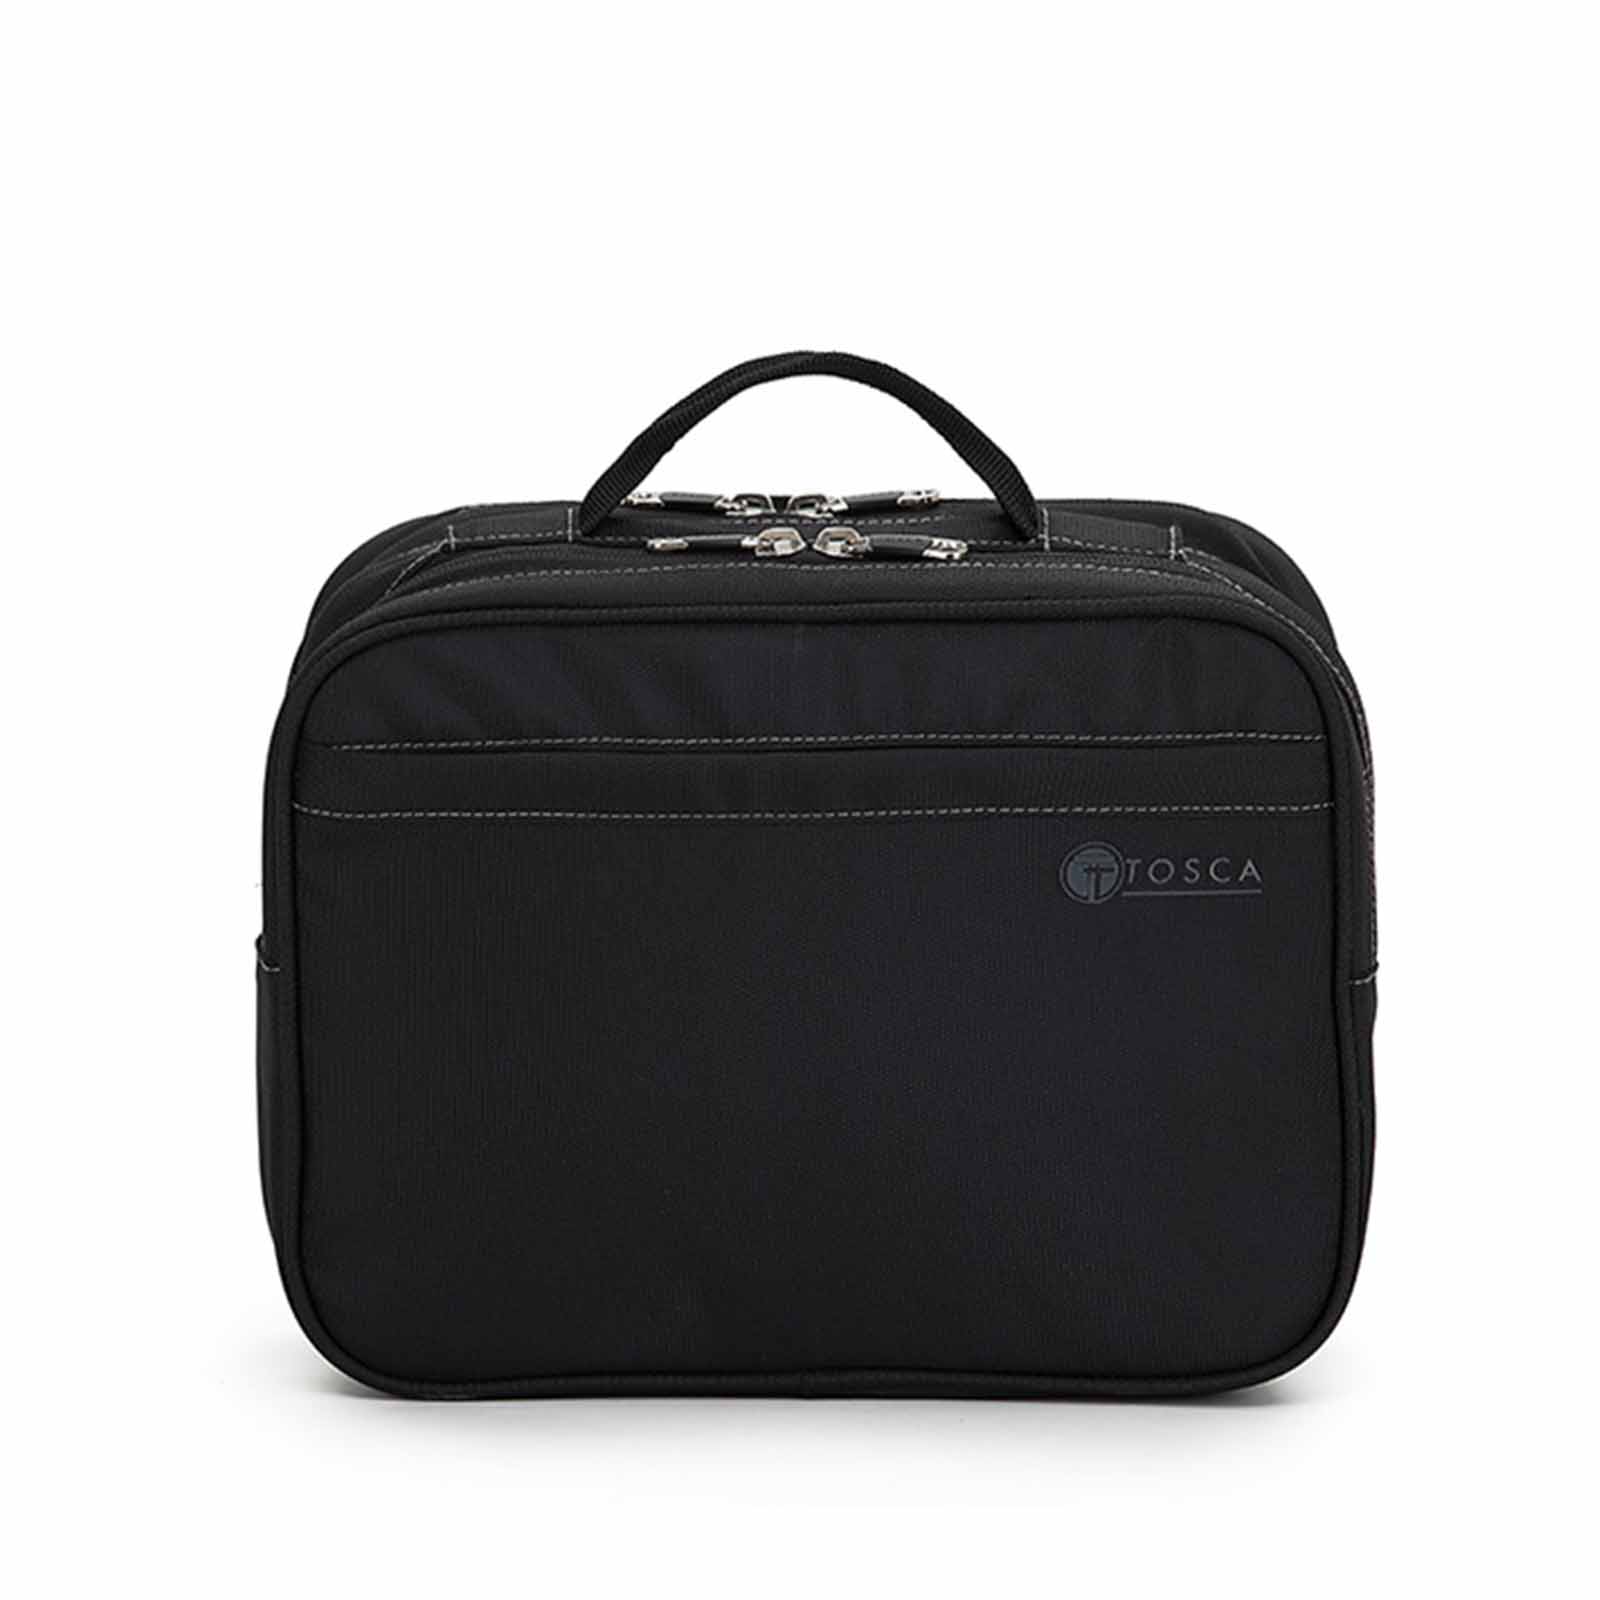 Tosca T.E 13inch Toiletry Bag Deluxe Black